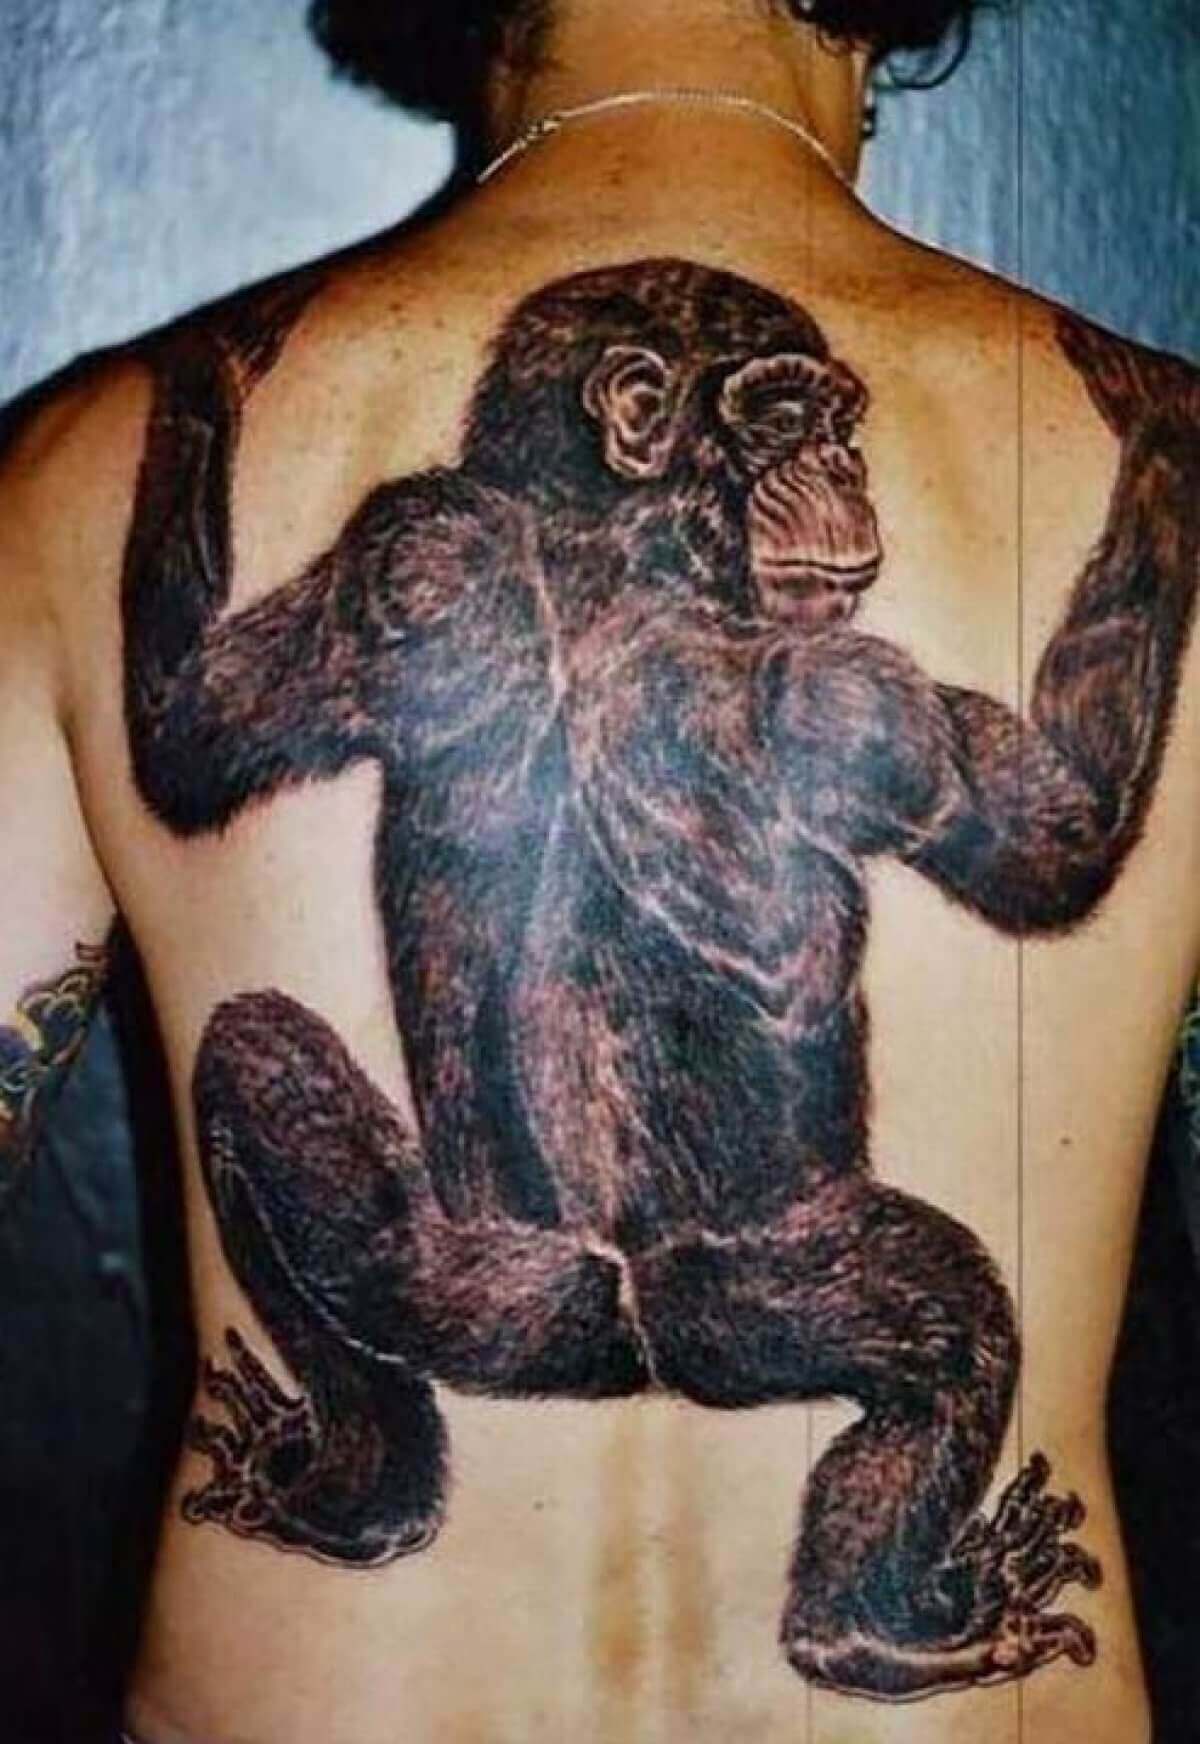 Funny tattoos: monkey on the back